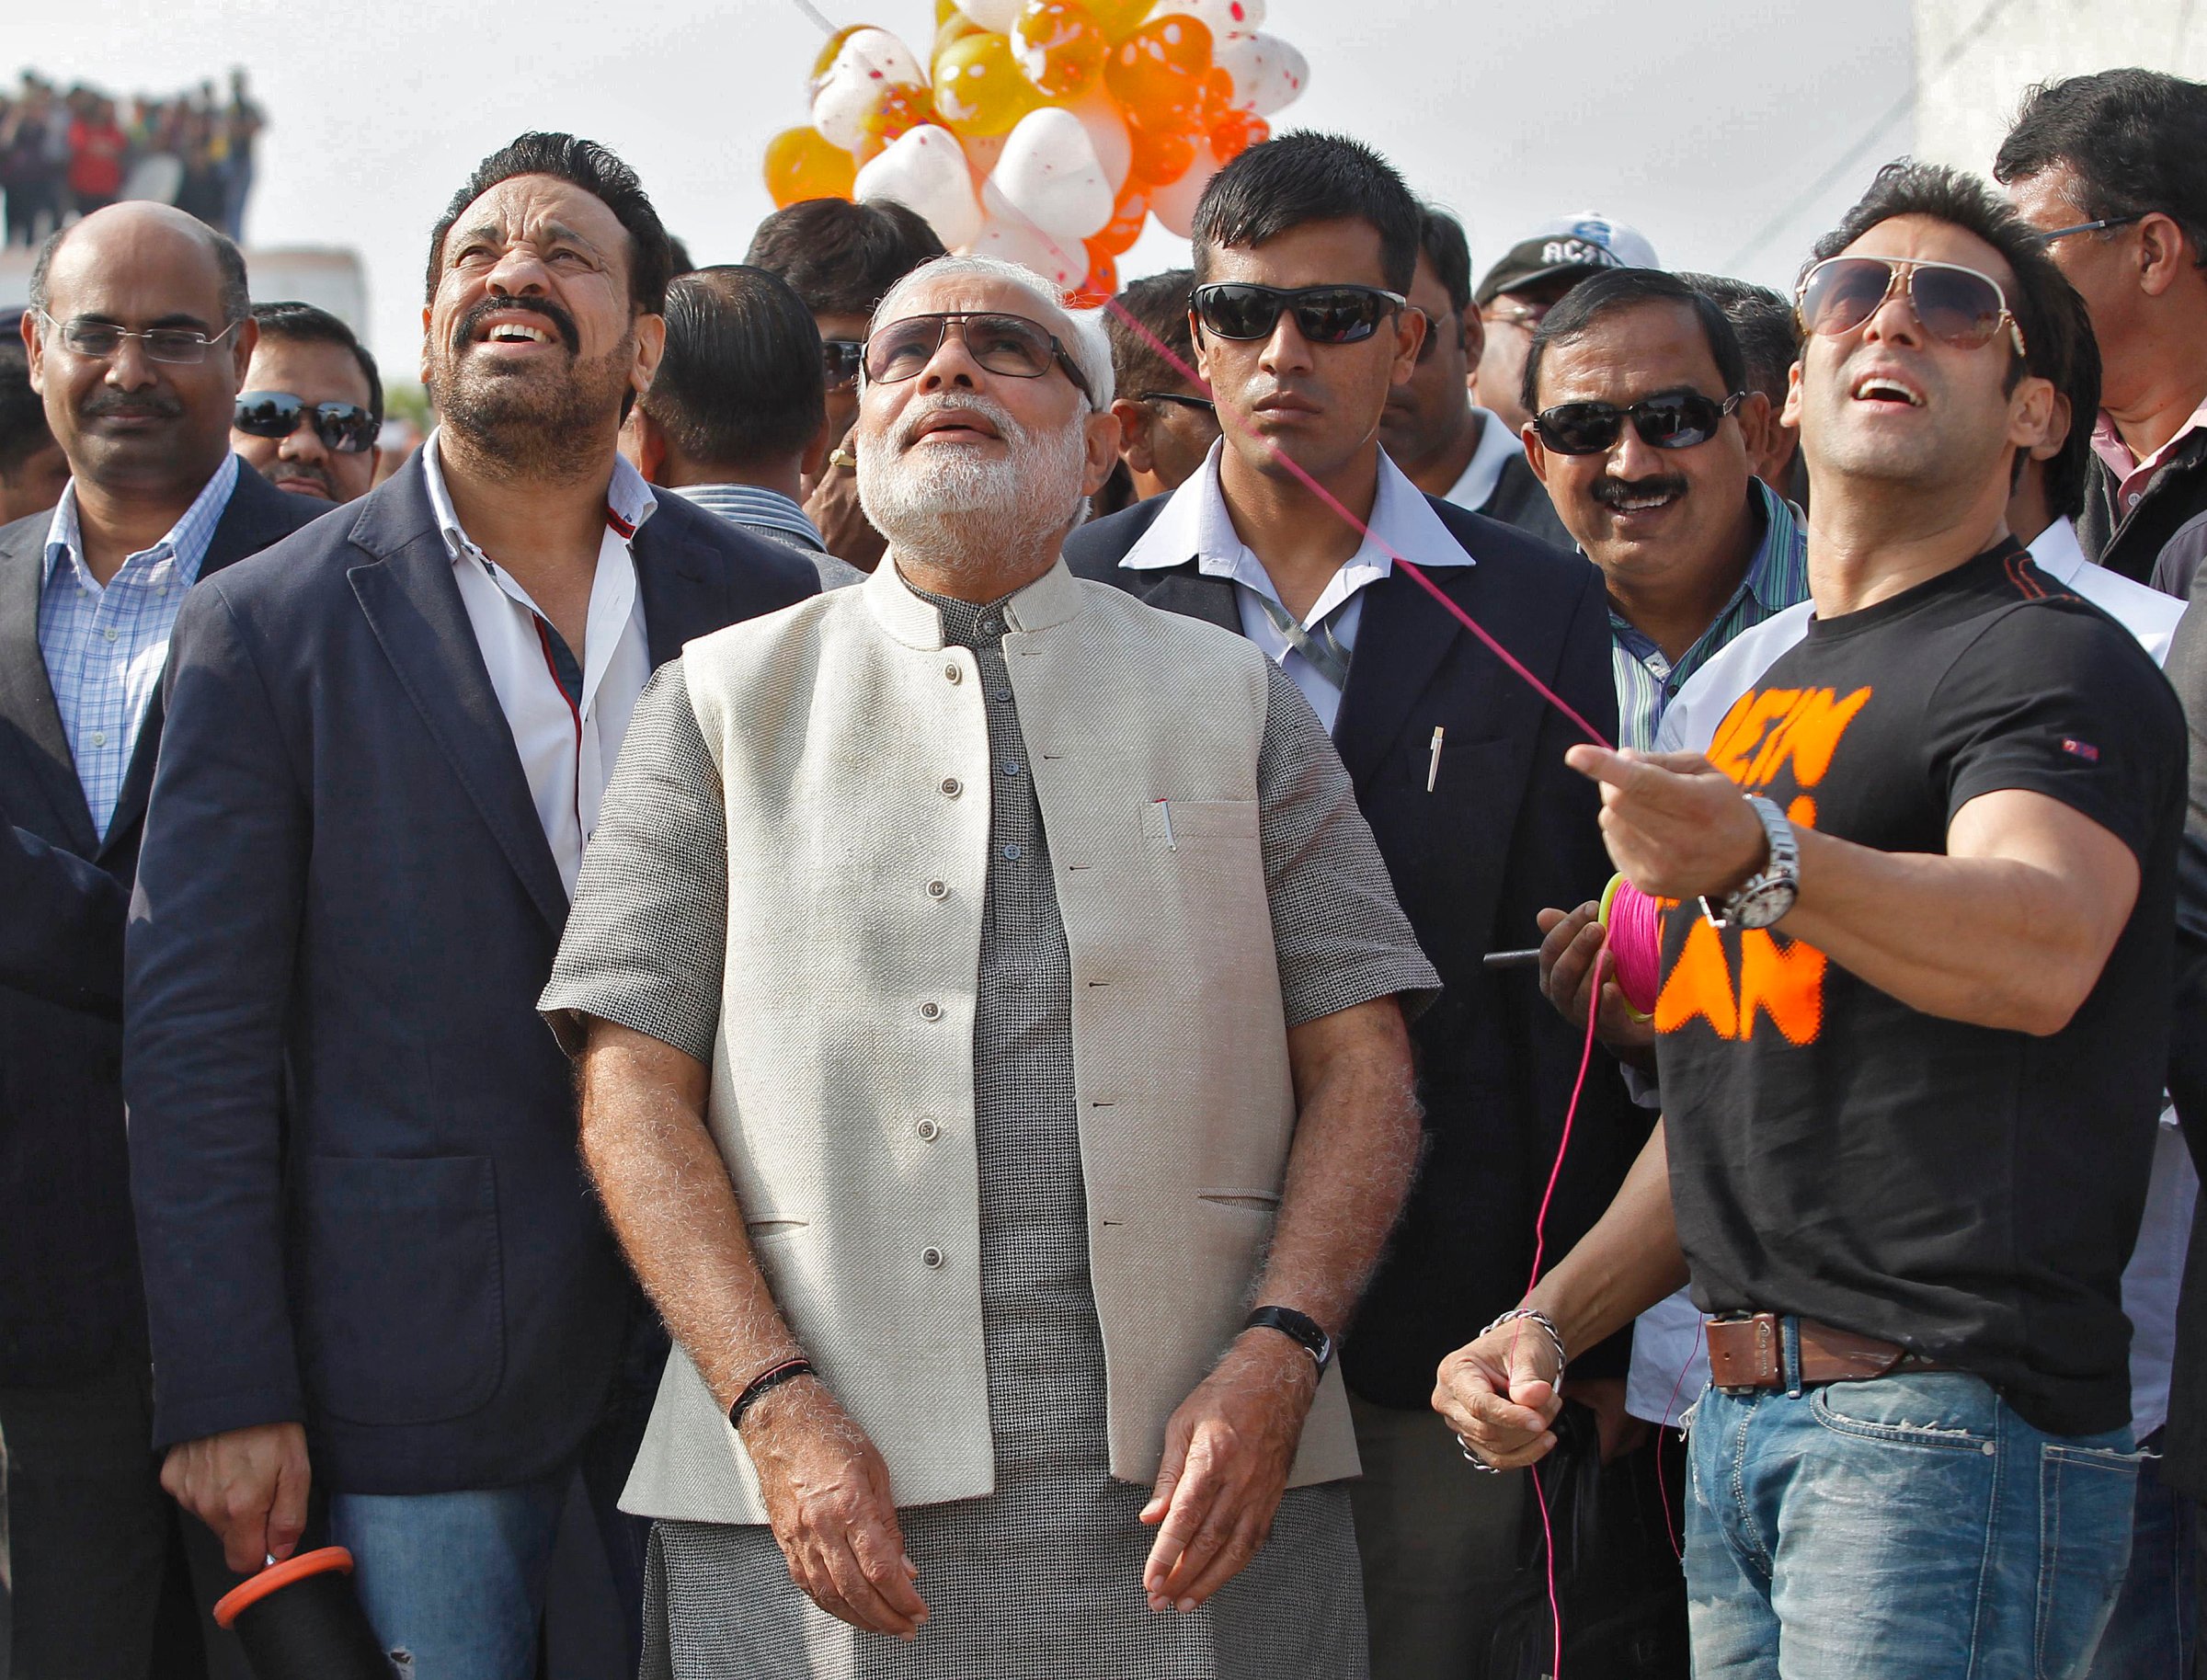 Bollywood actor Khan flies a kite as Hindu nationalist Modi watches during a kite flying festival in Ahmedabad